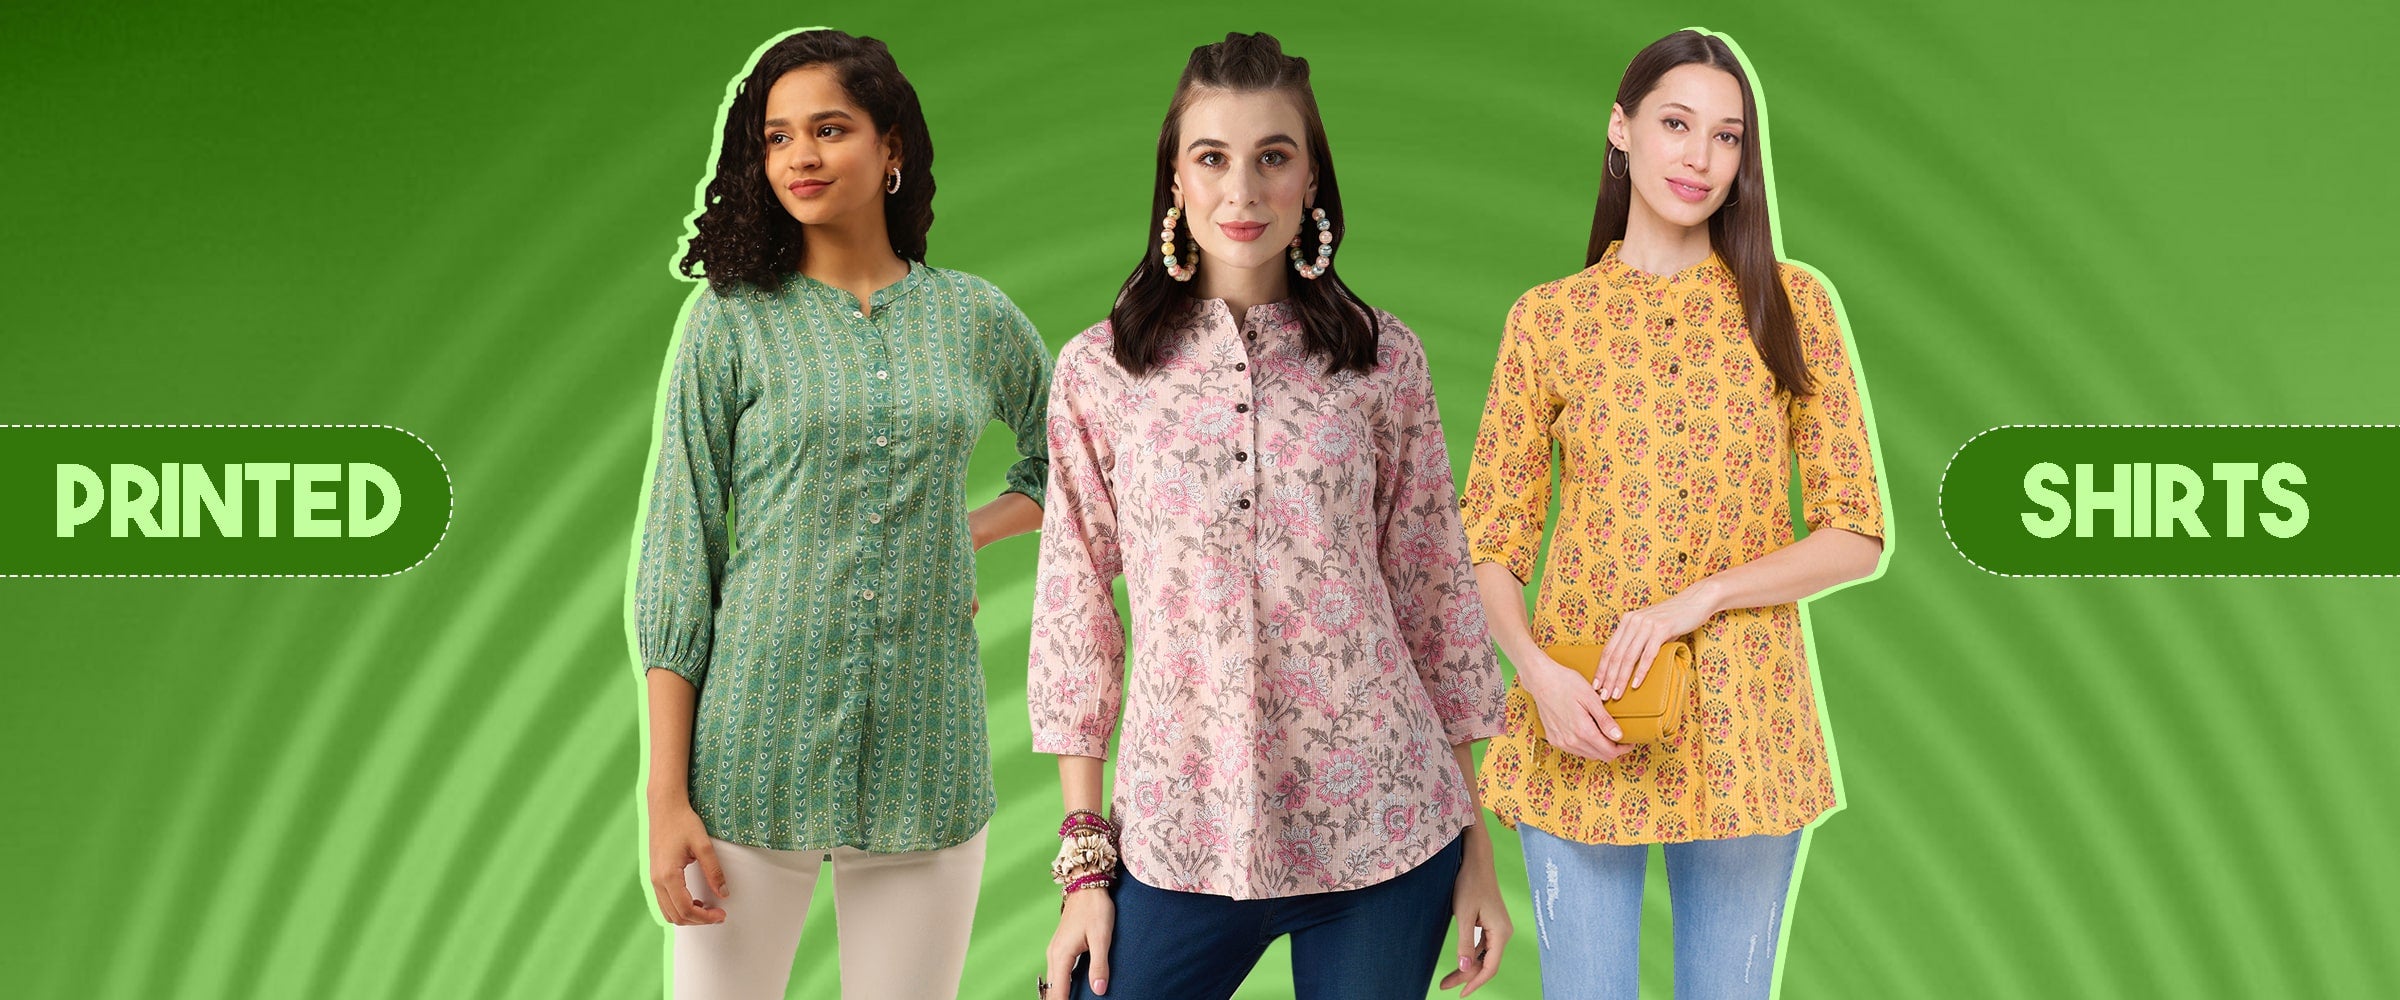 Style your Winter Outfits with 10 Printed Shirts from Zola